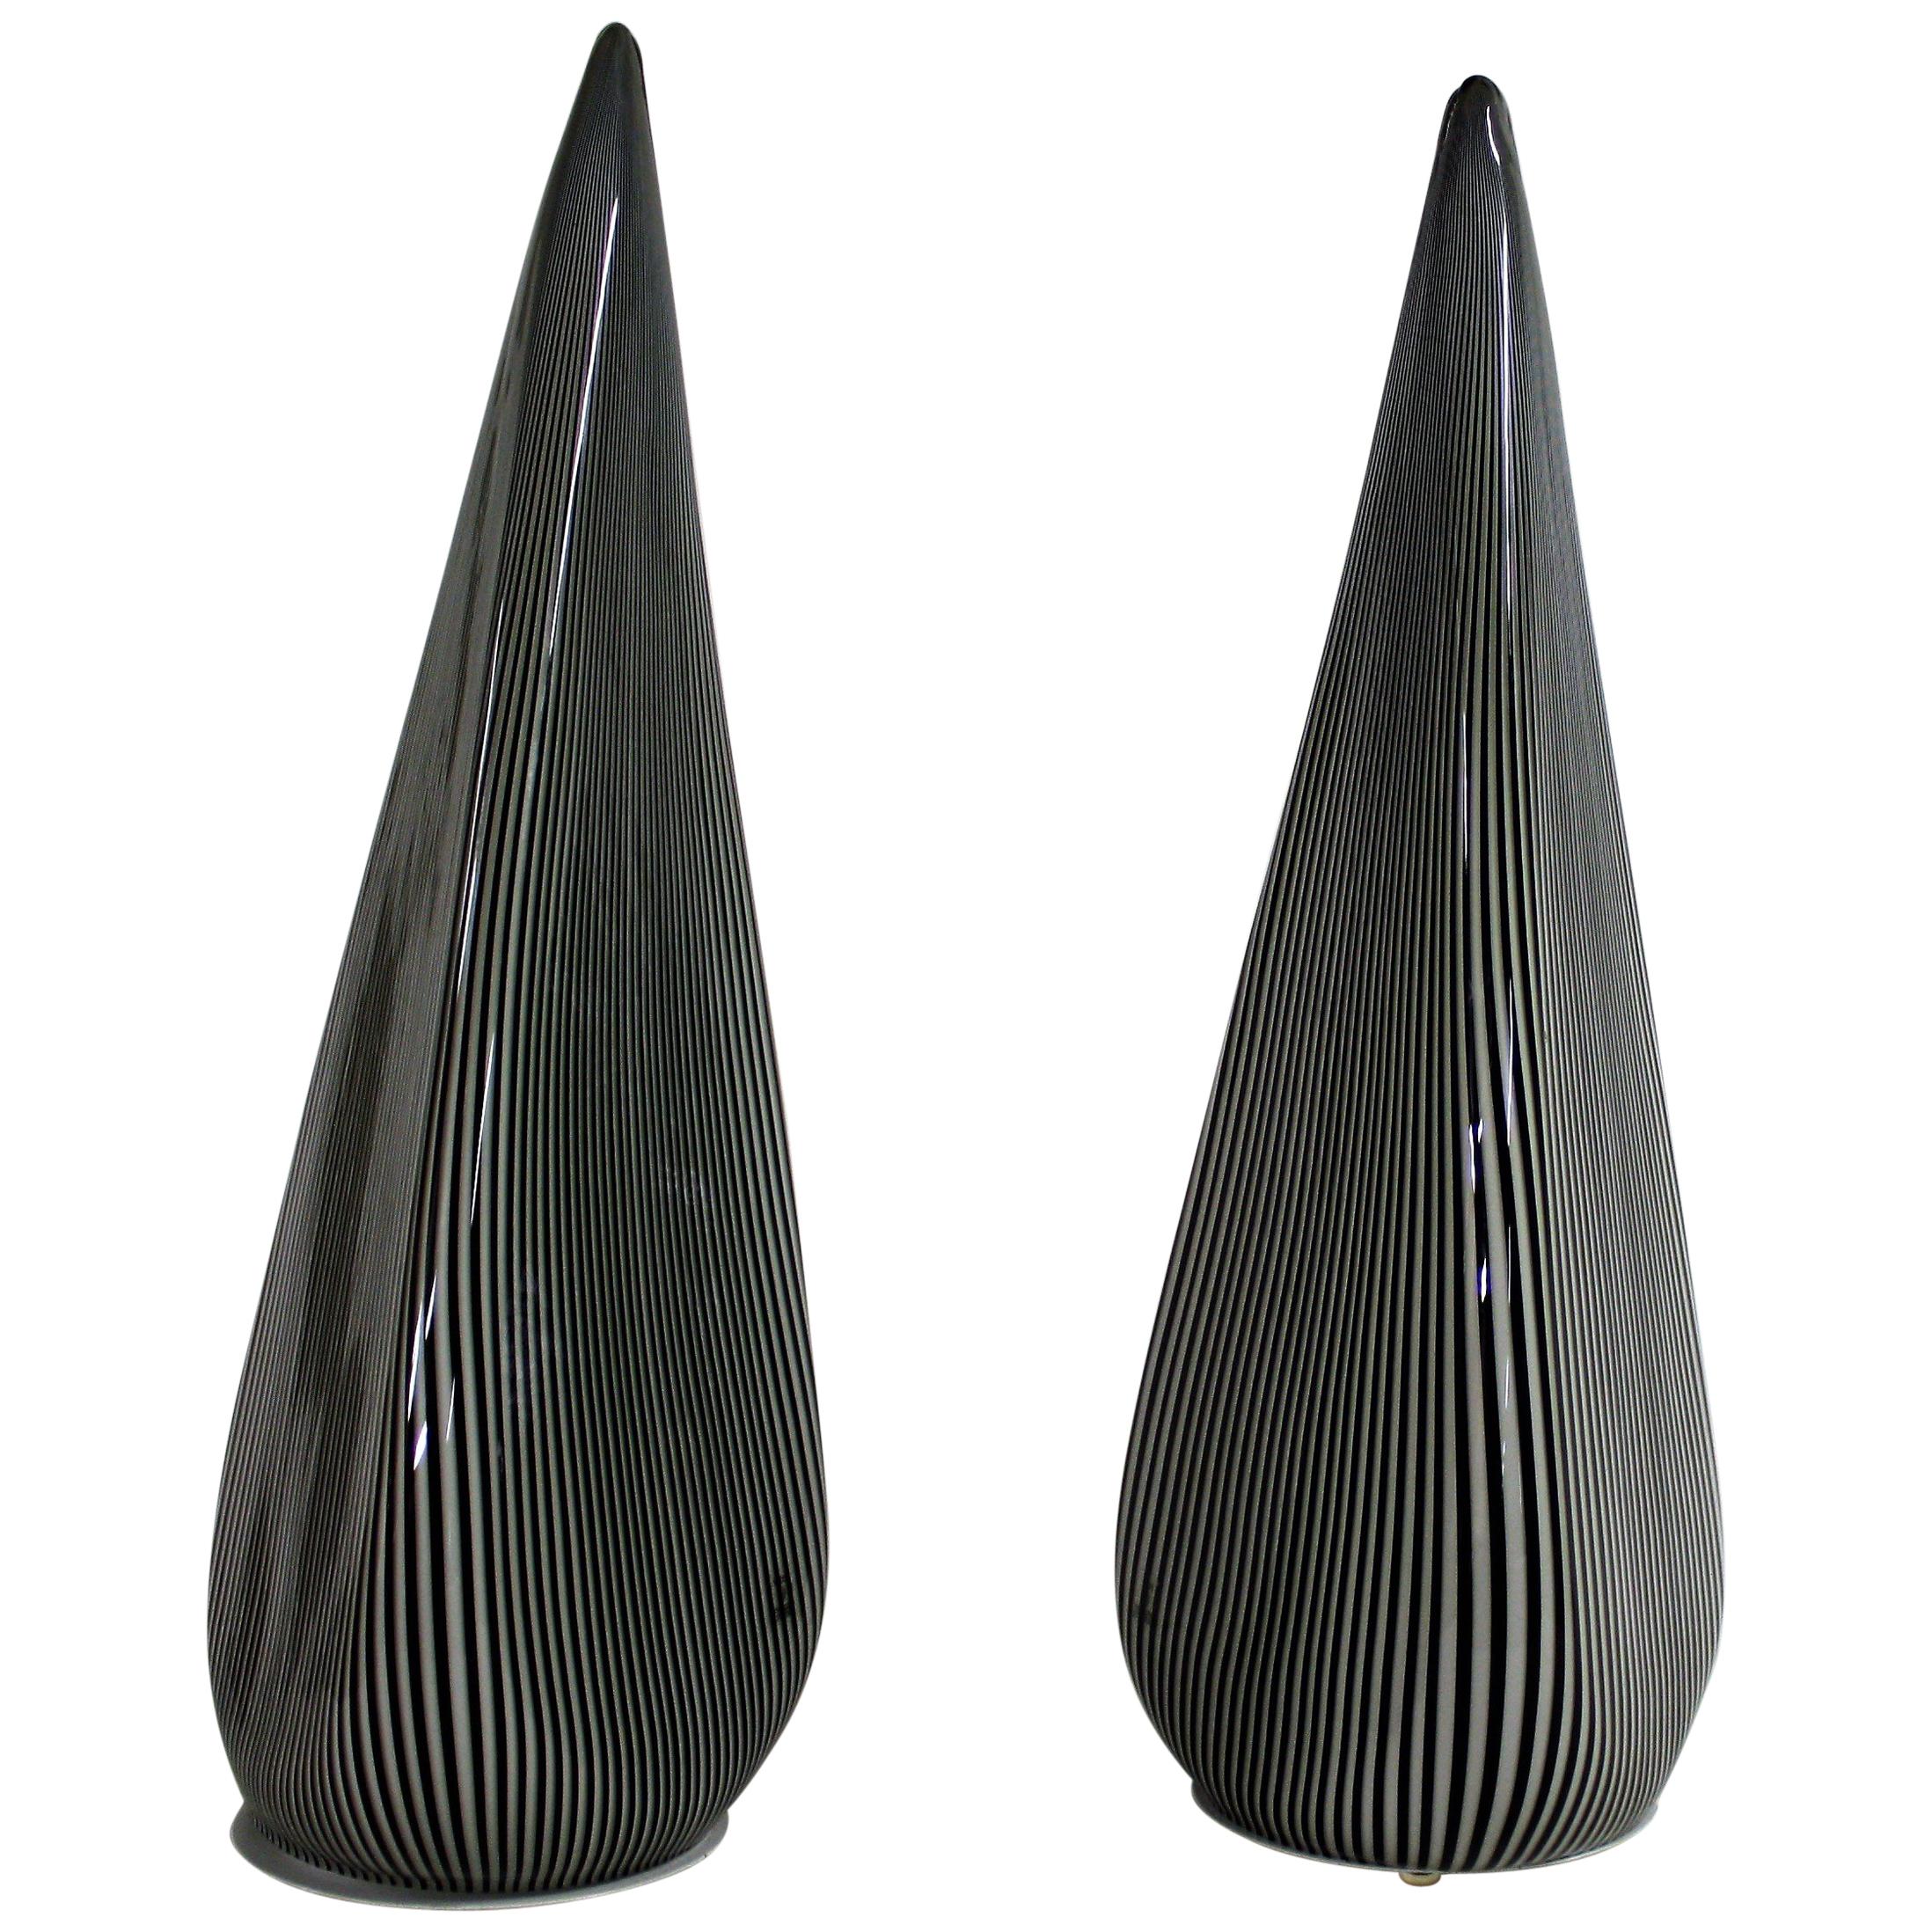 Pair of Large Murano Pyramid Lamps by Vetri, 1970s